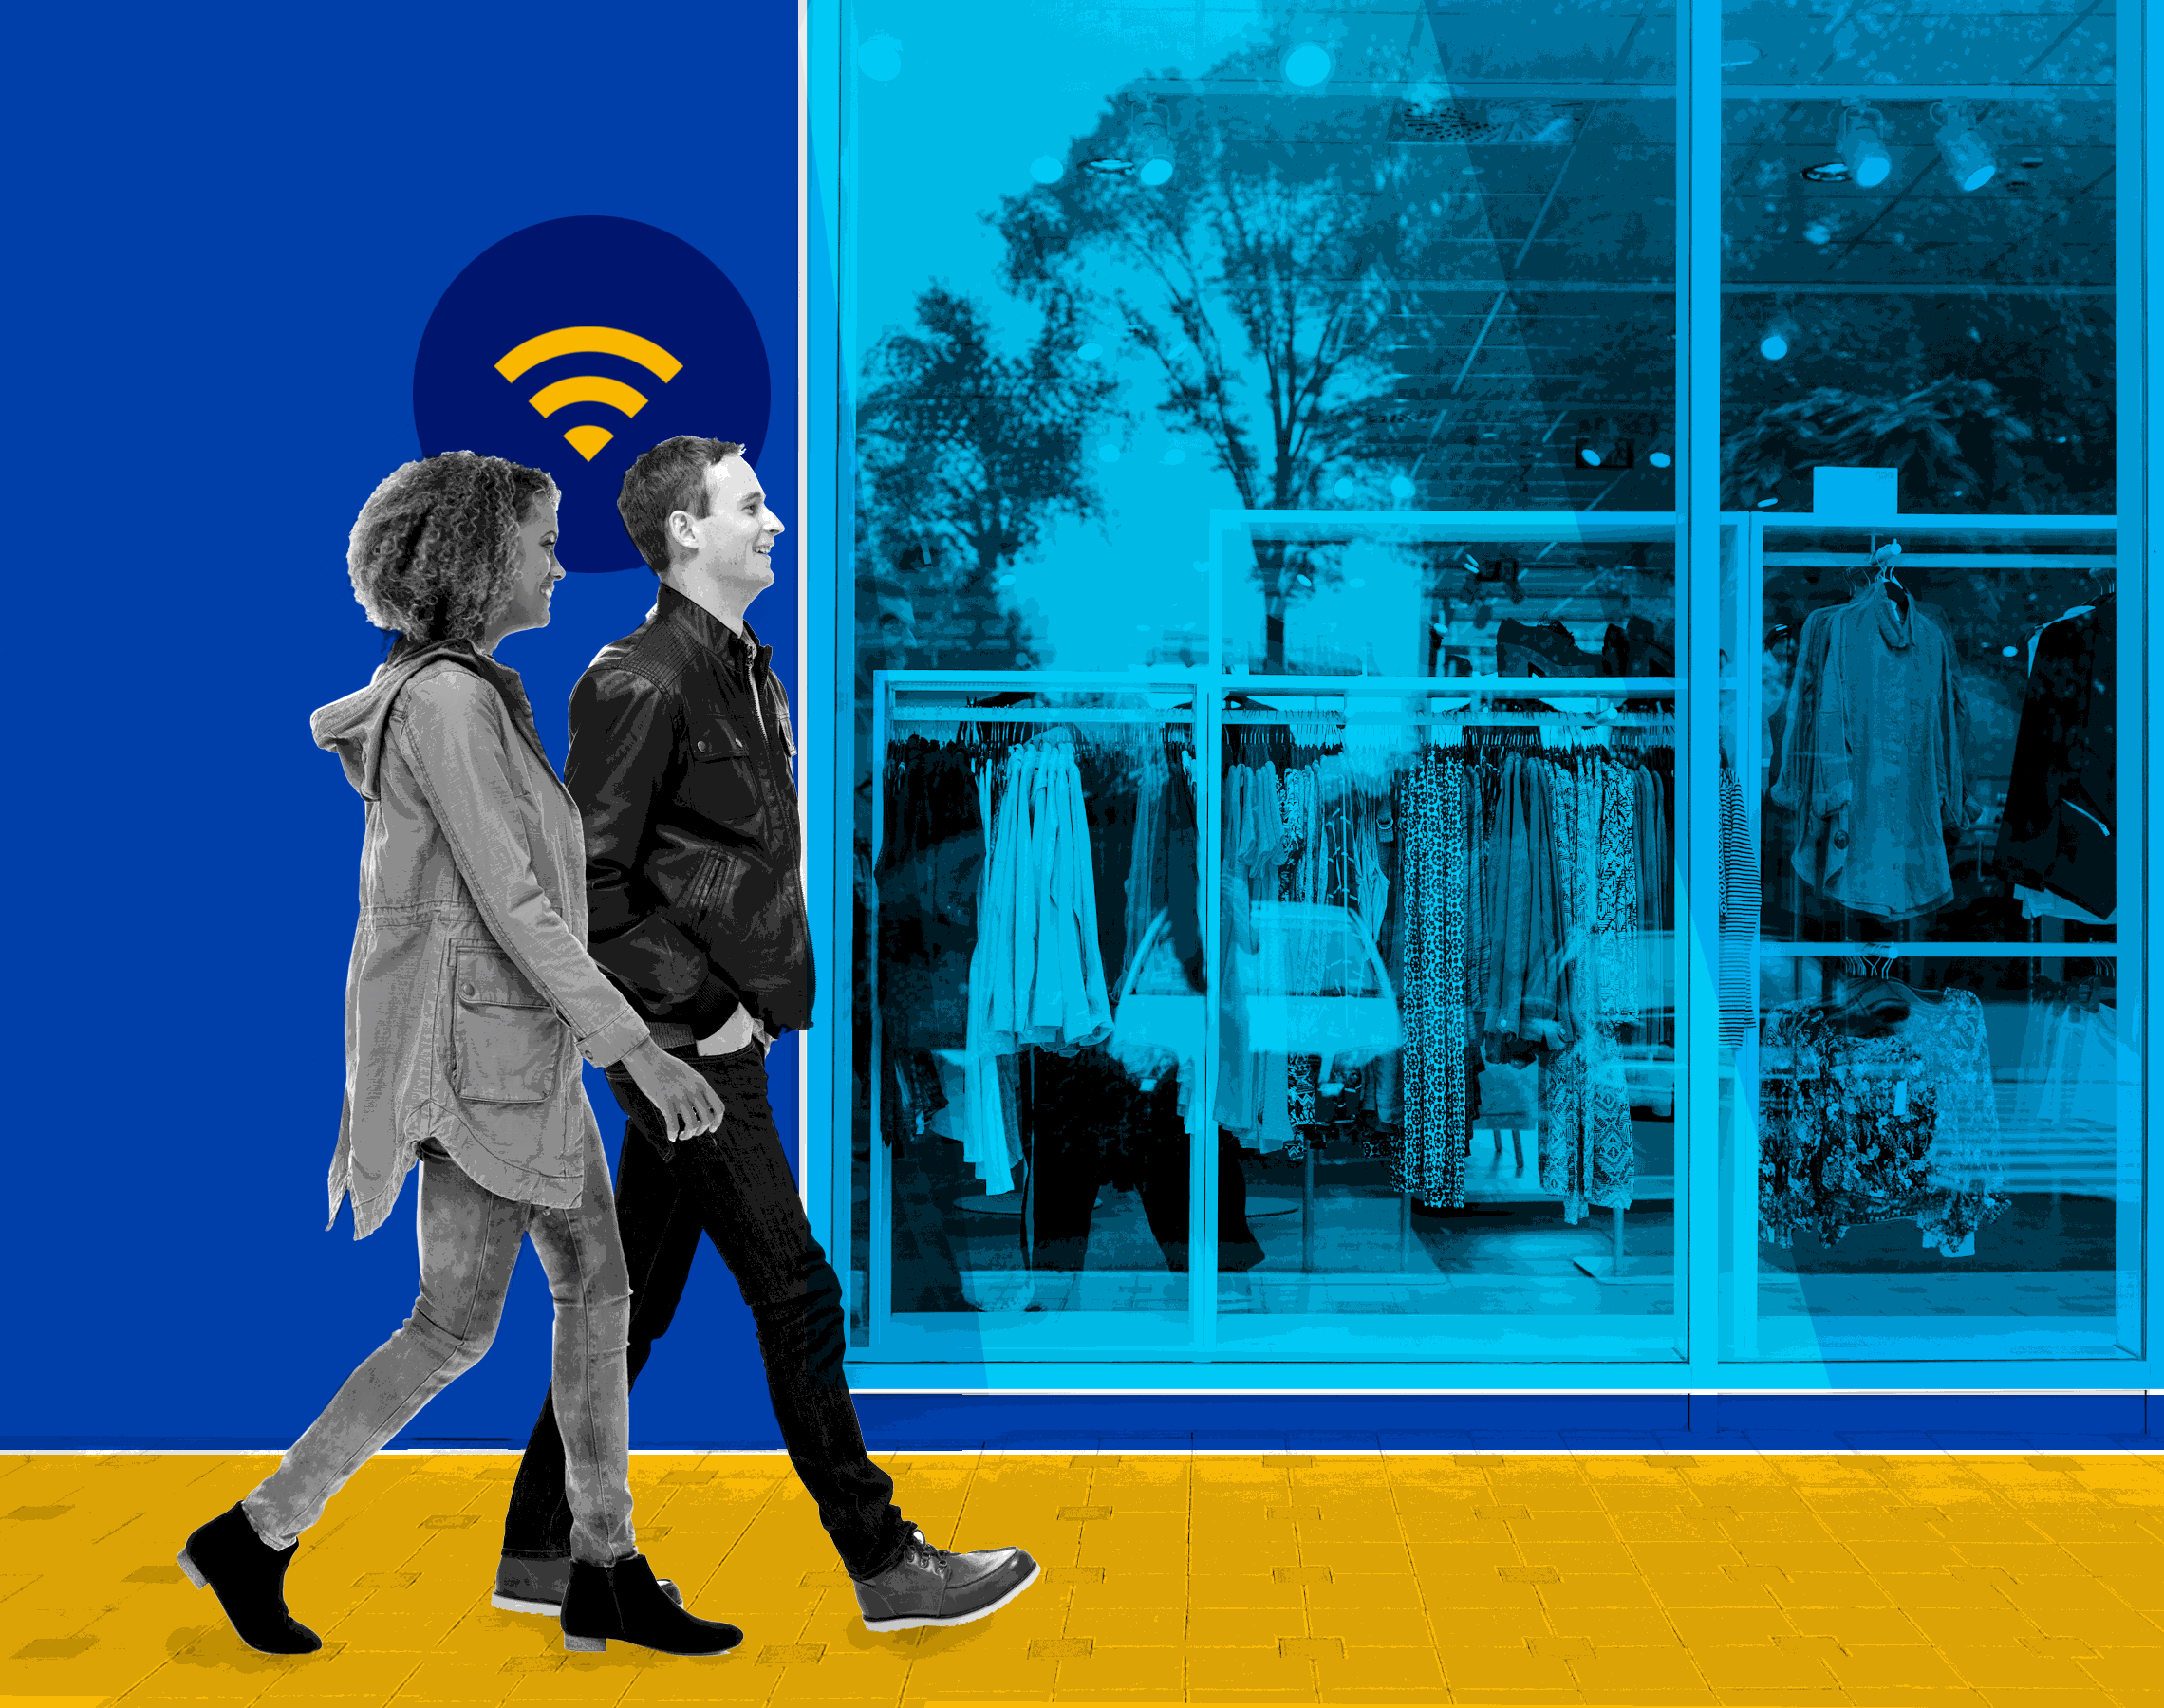 Two people walking down the street in front of a shop